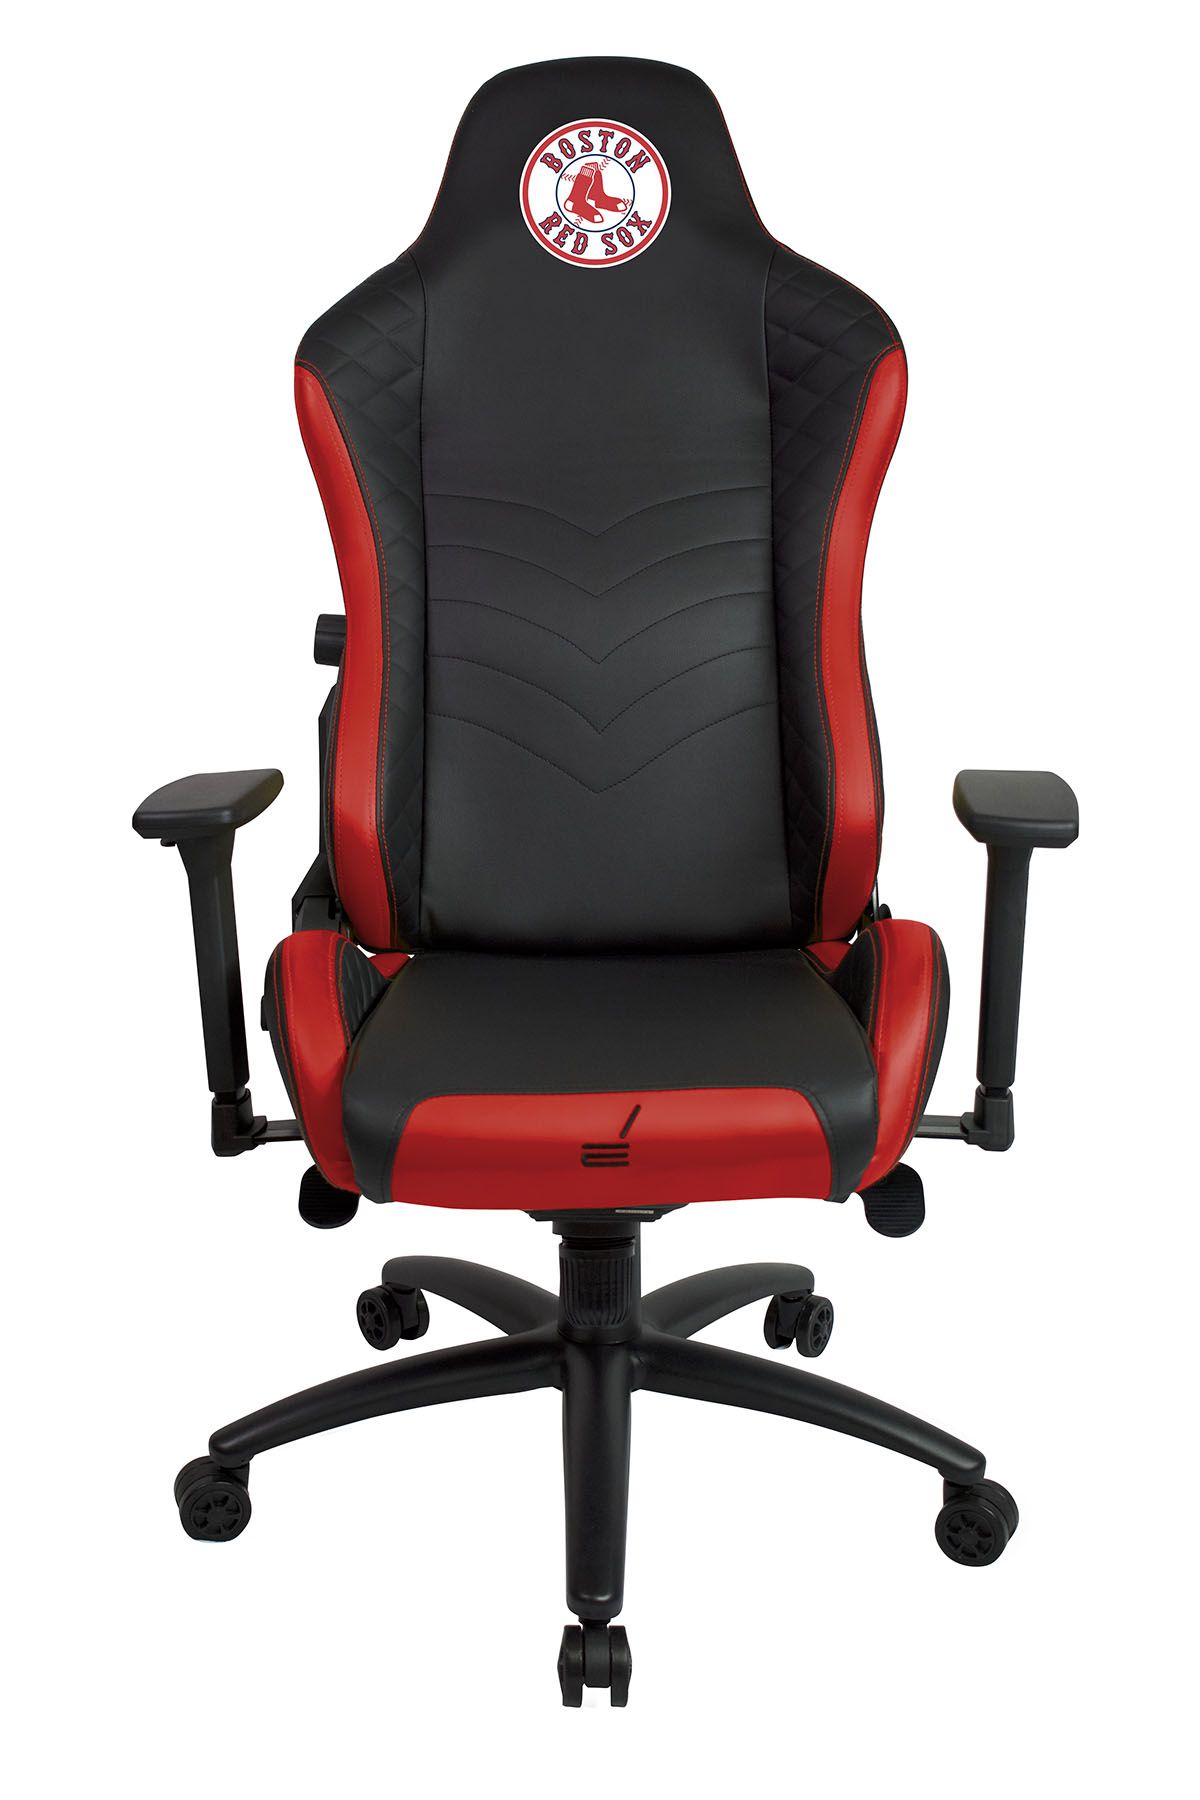 Boston Red Sox REACT Pro Series Gaming Chair